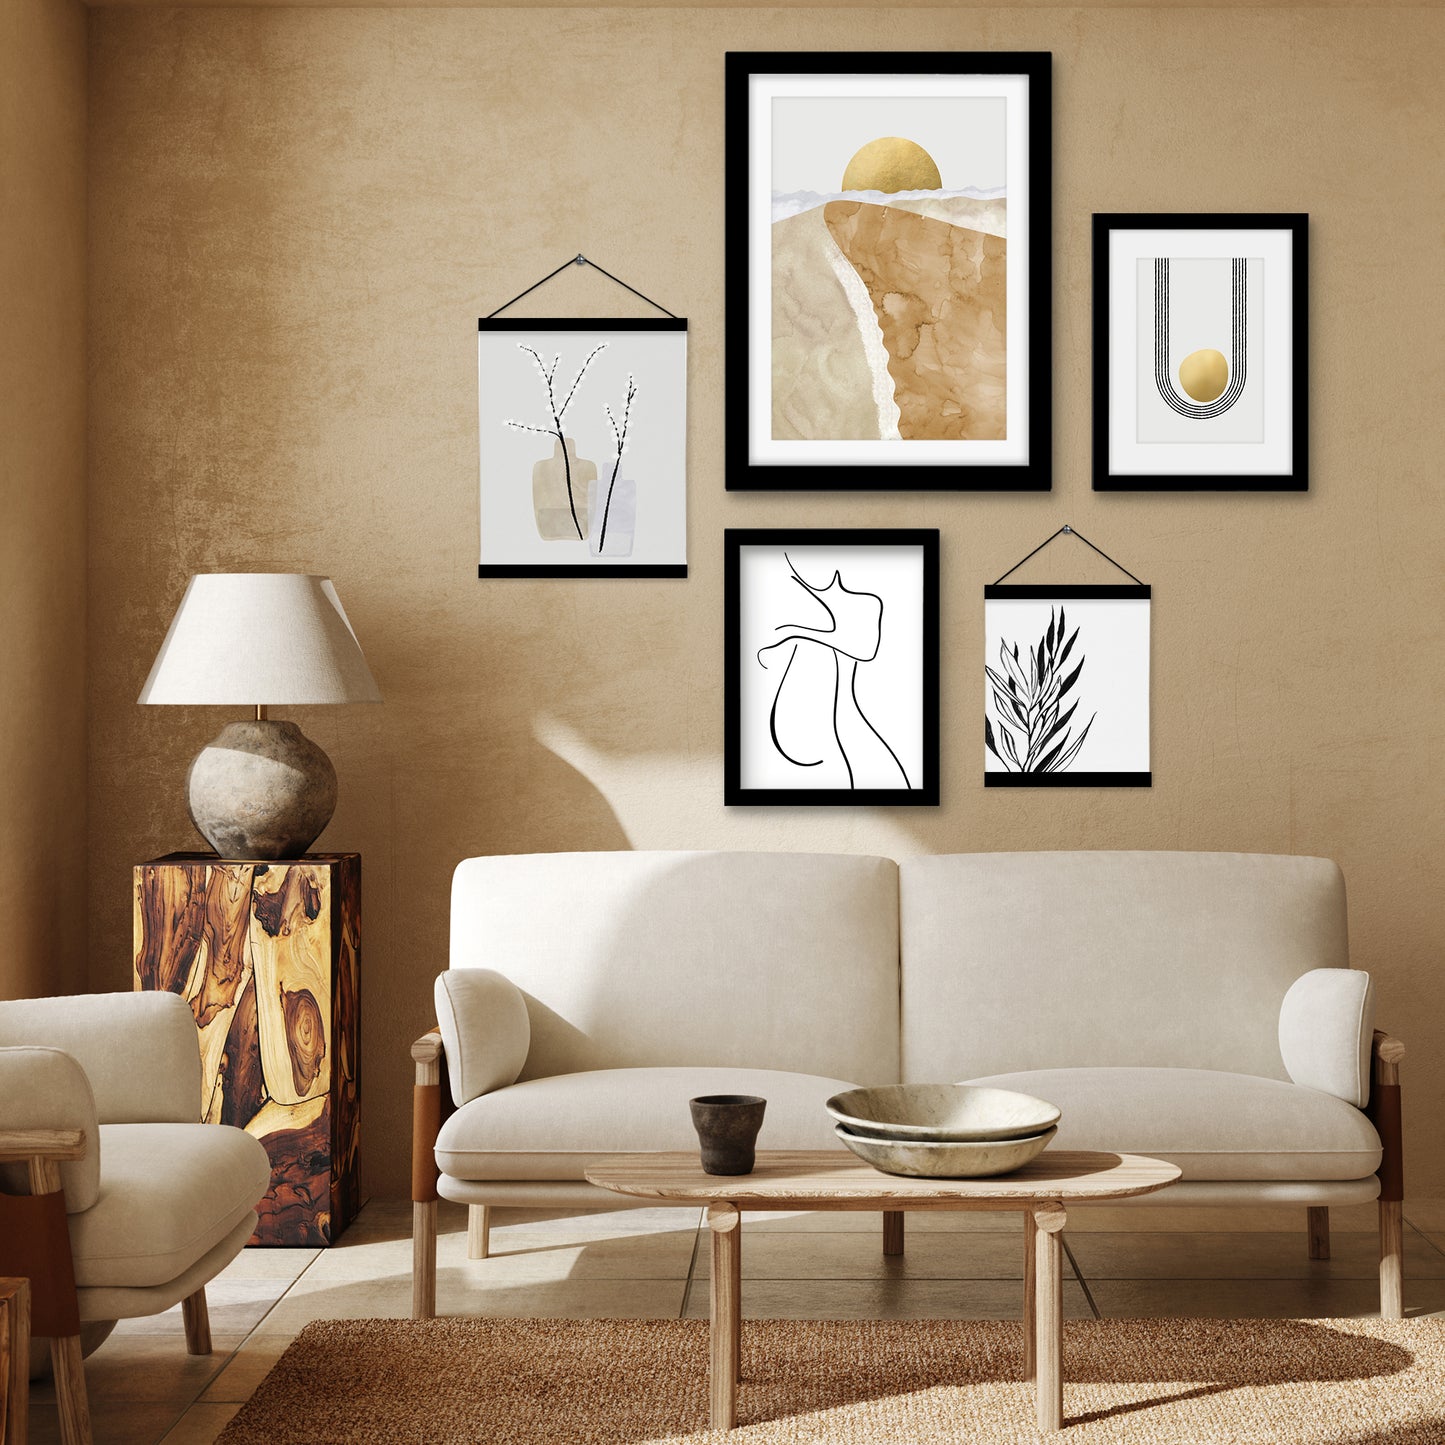 Black and Gold Abstract Floral Shapes Framed Multimedia Gallery Art Set